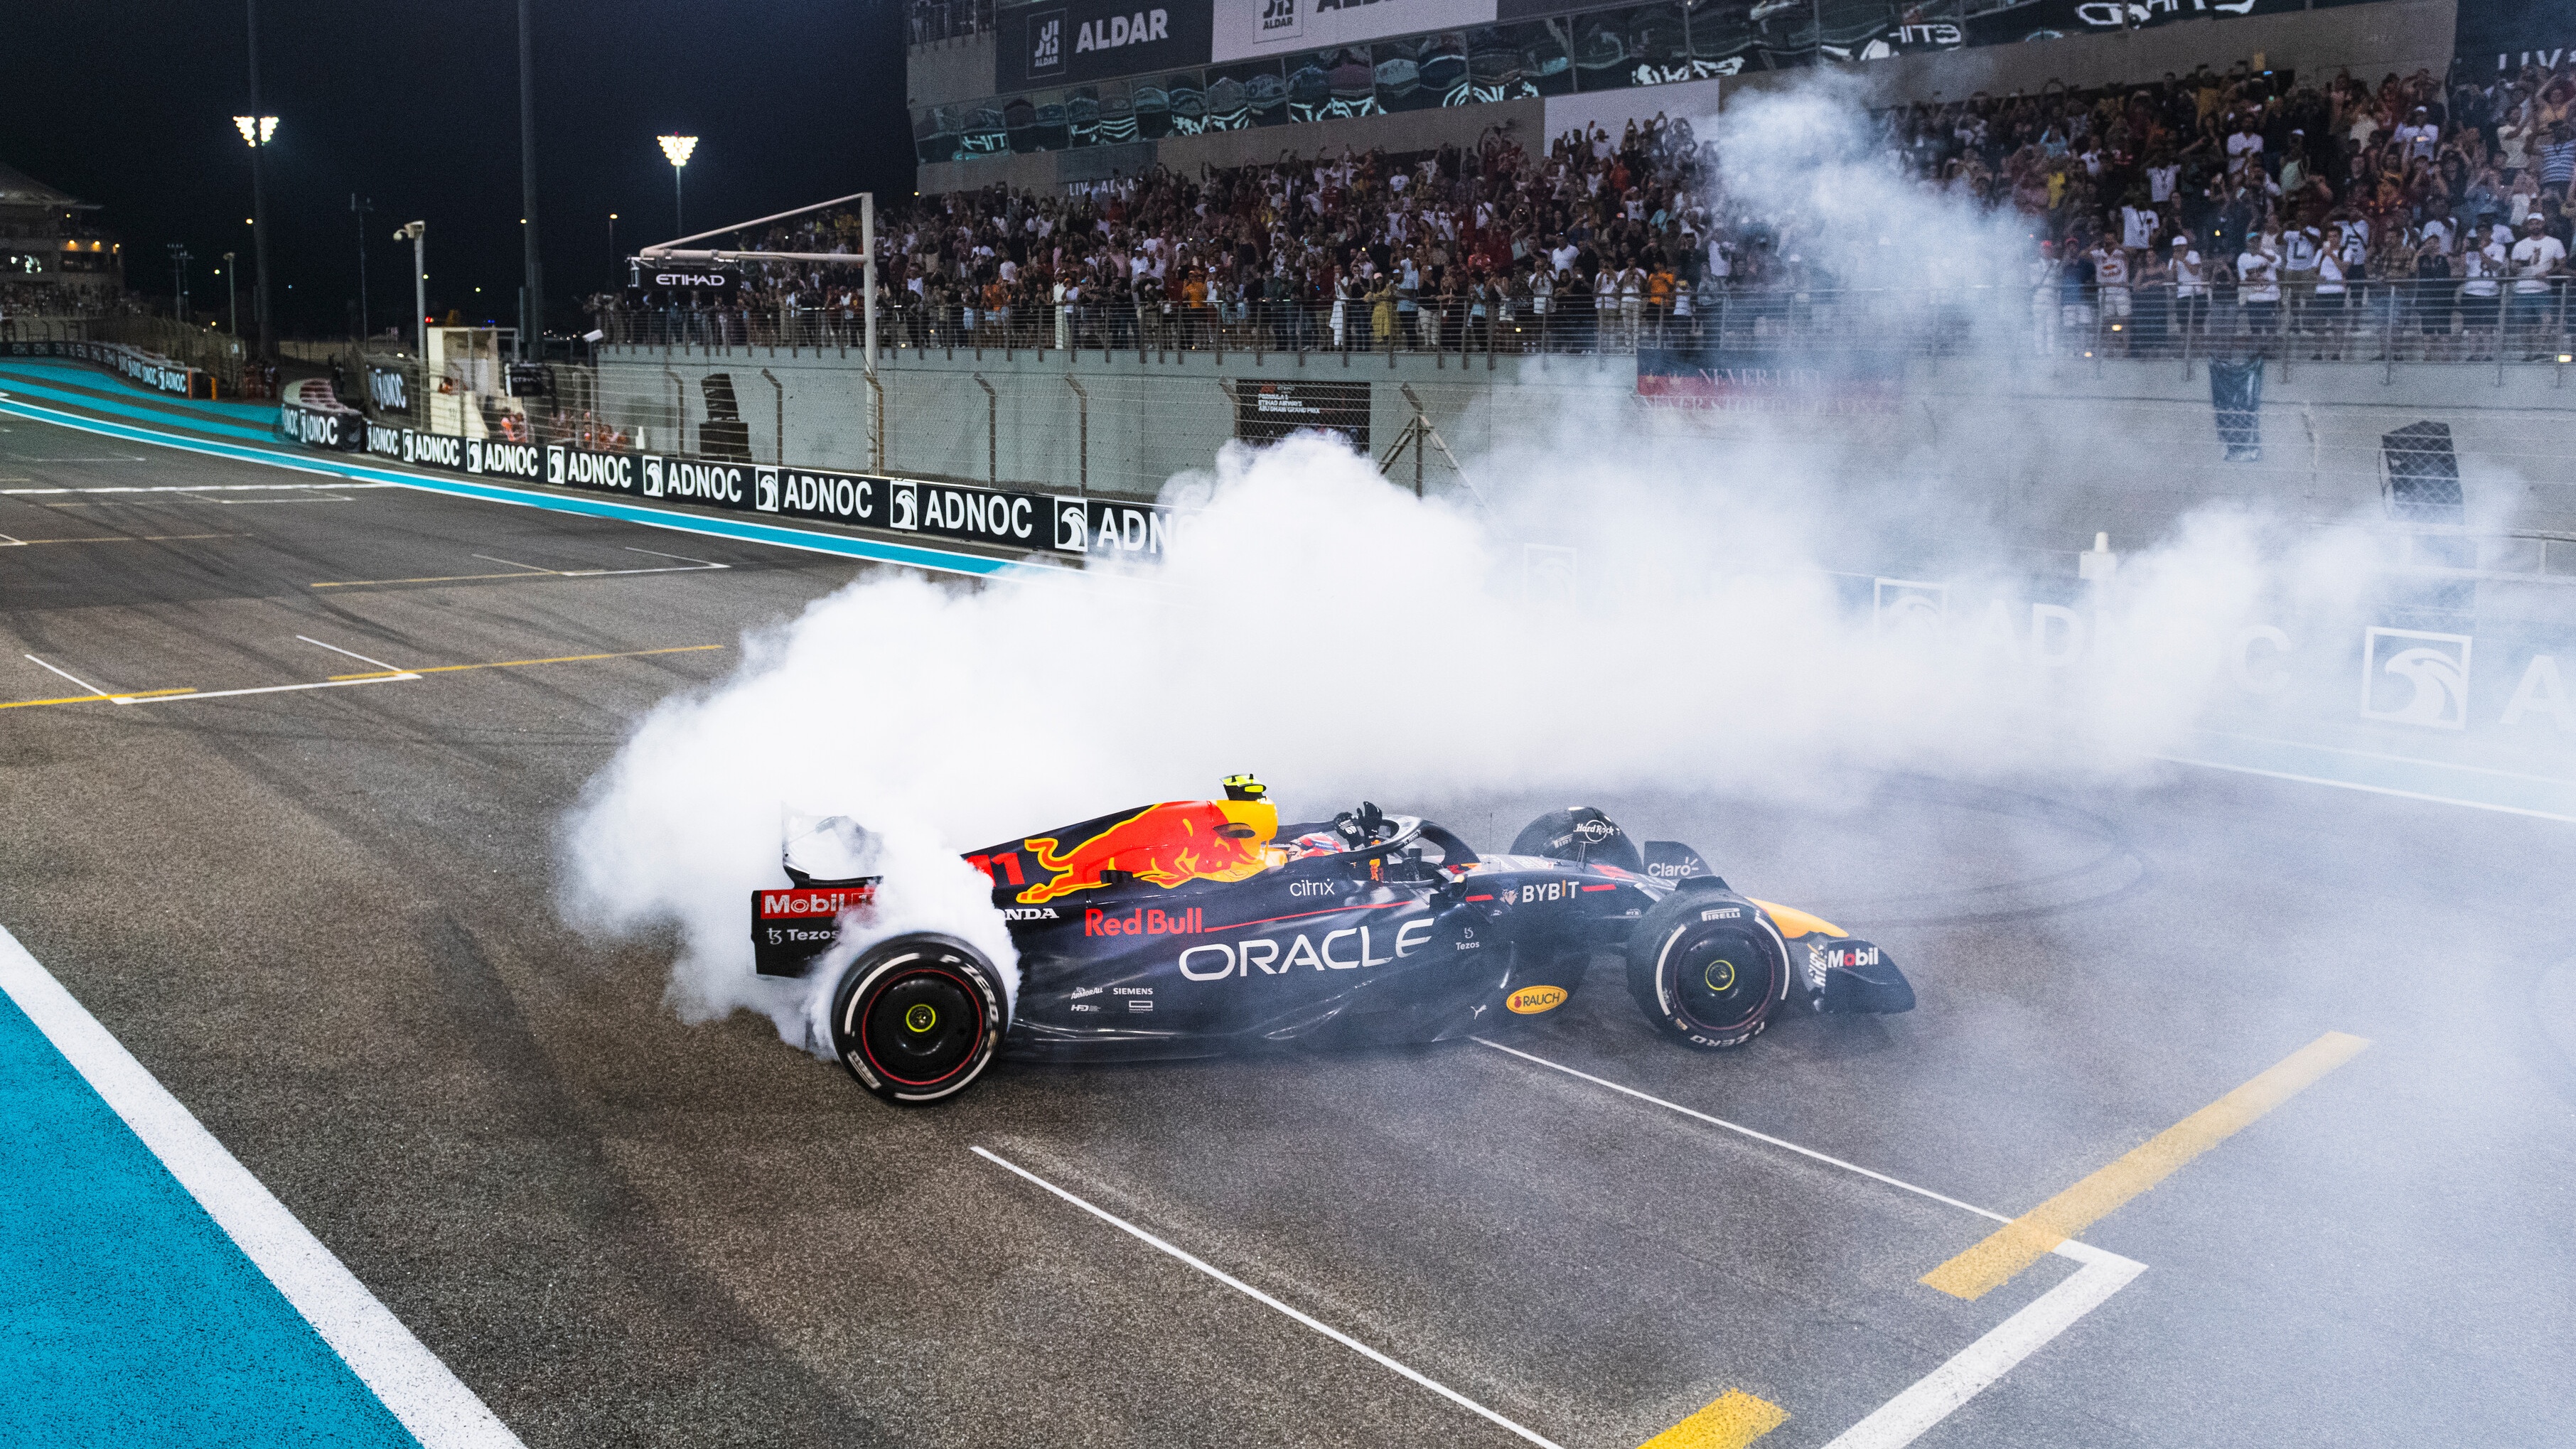 Red Bull F1 car doing doughnuts on the track